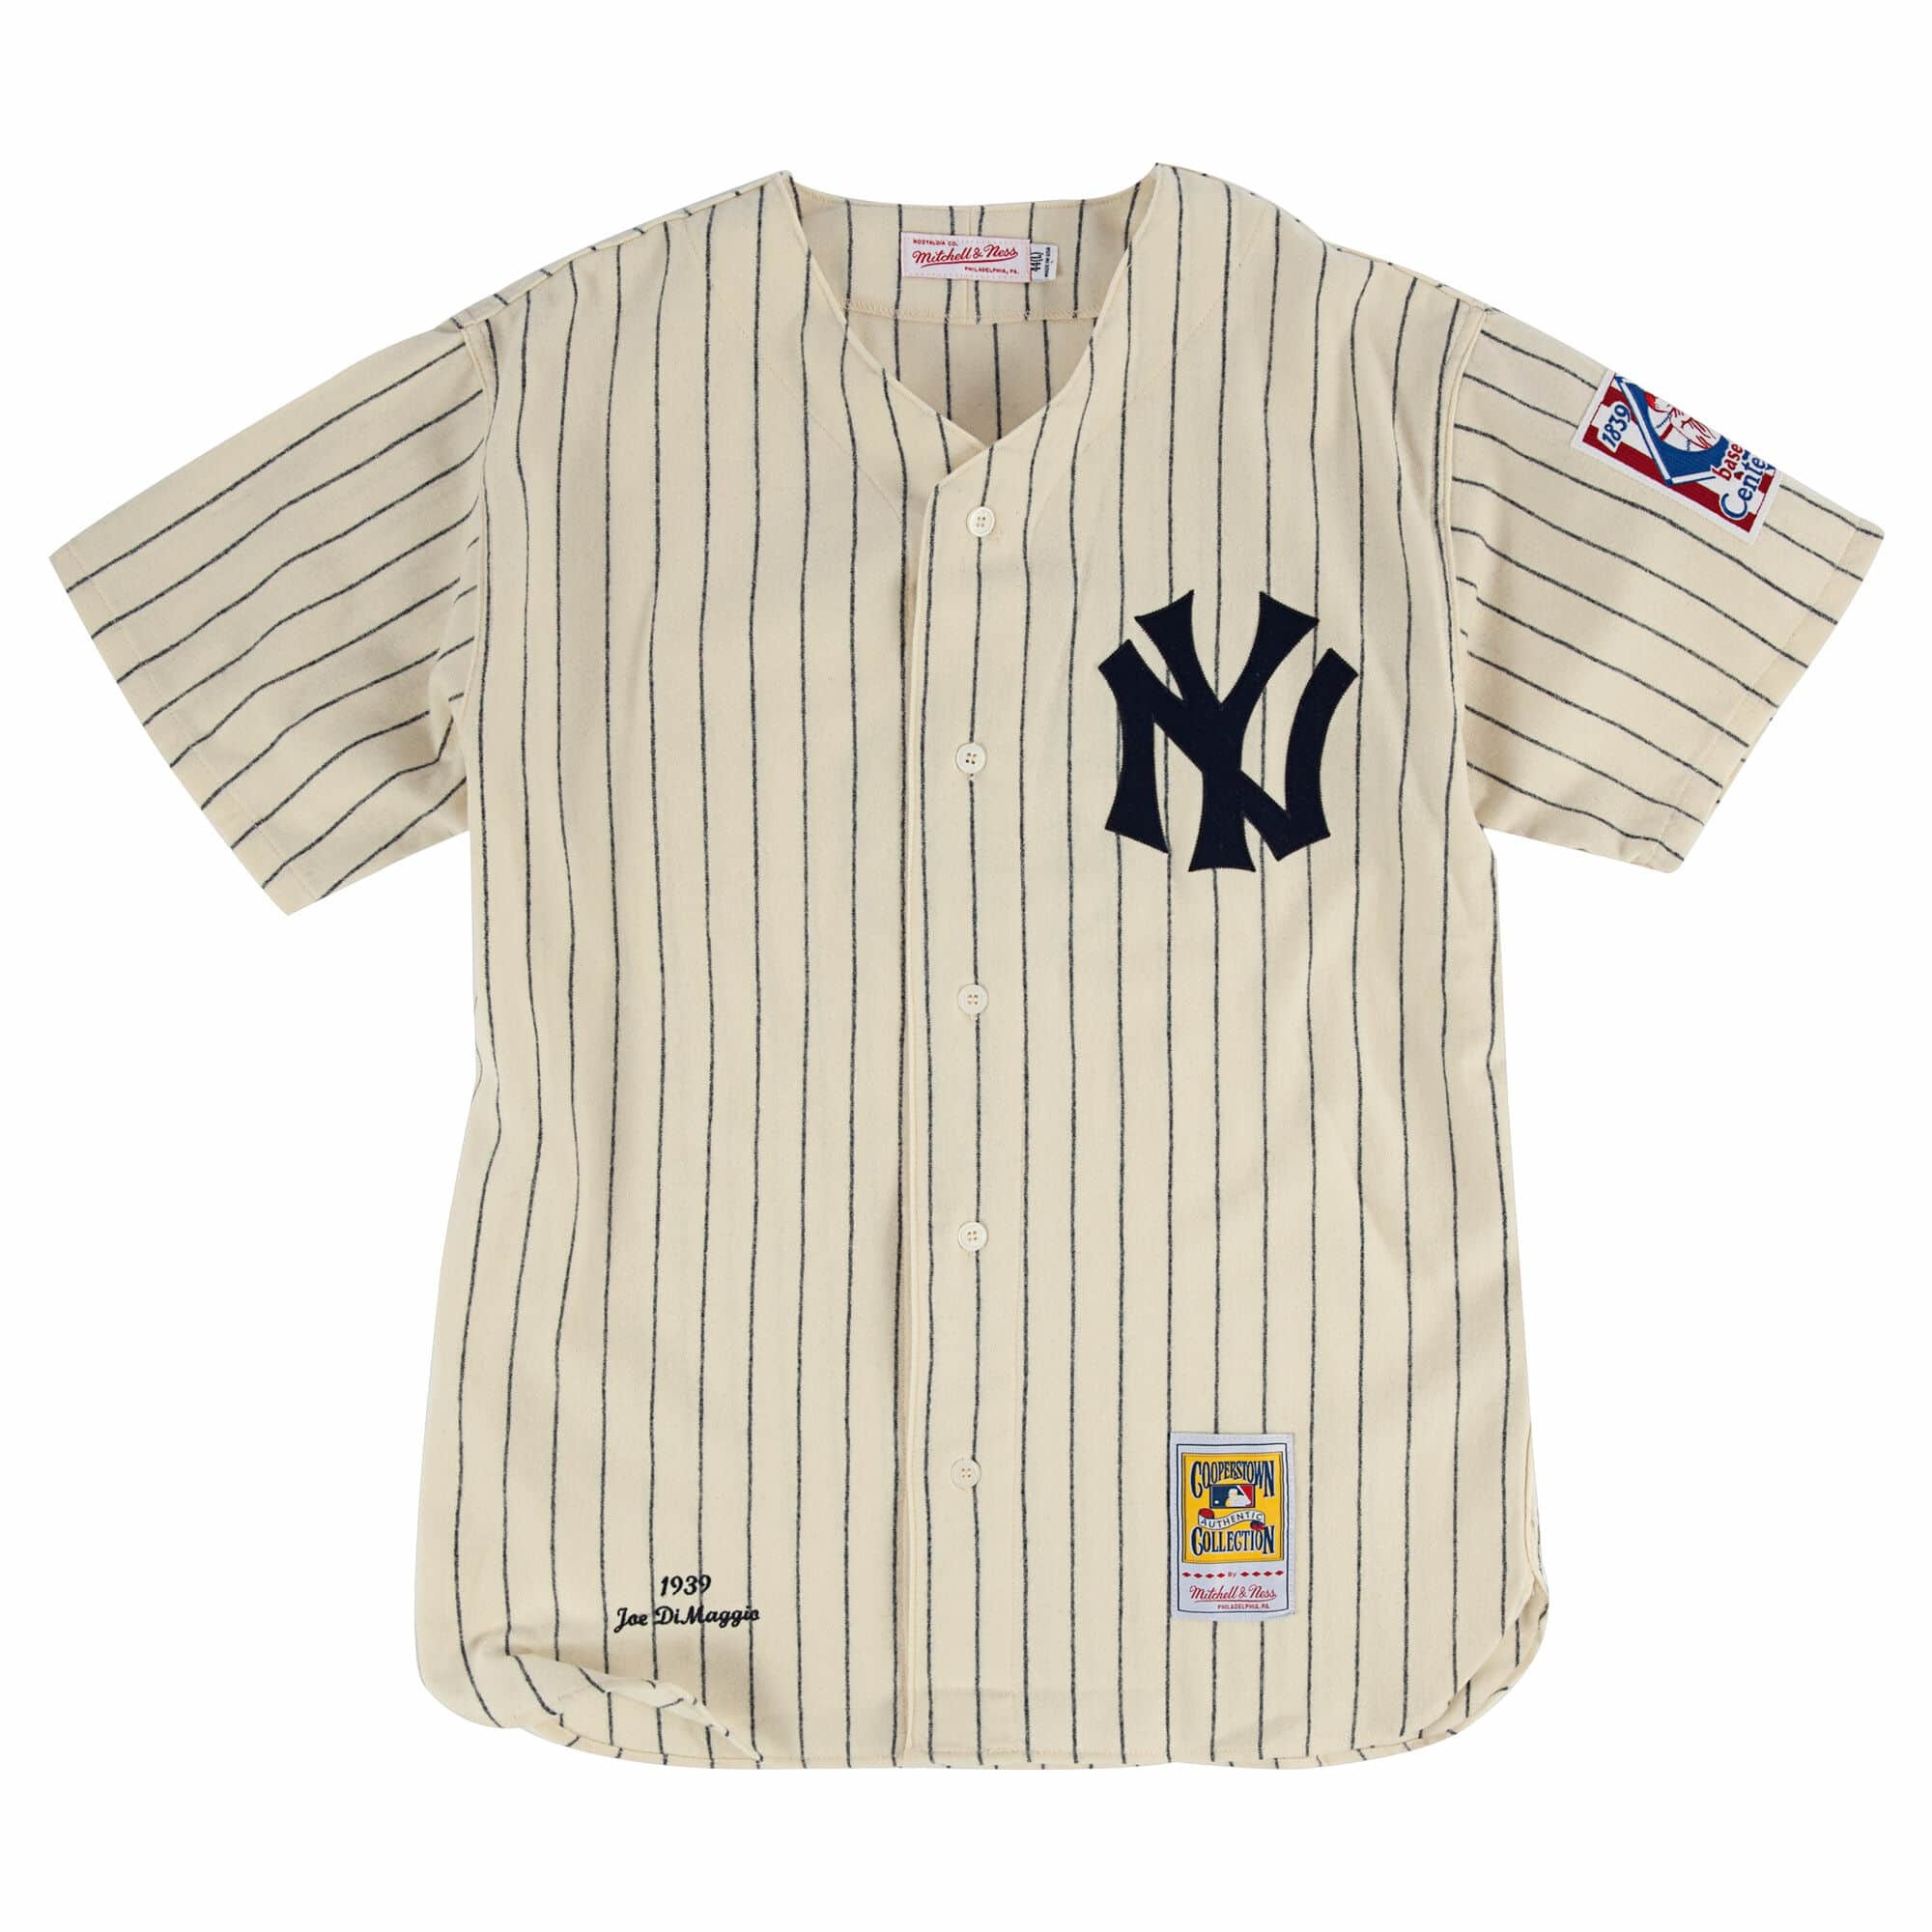 Joe DiMaggio #5 home pinstripes 1939 throwback New Never worn Size 52 Yankees  Jersey for Sale in Delray Beach, FL - OfferUp